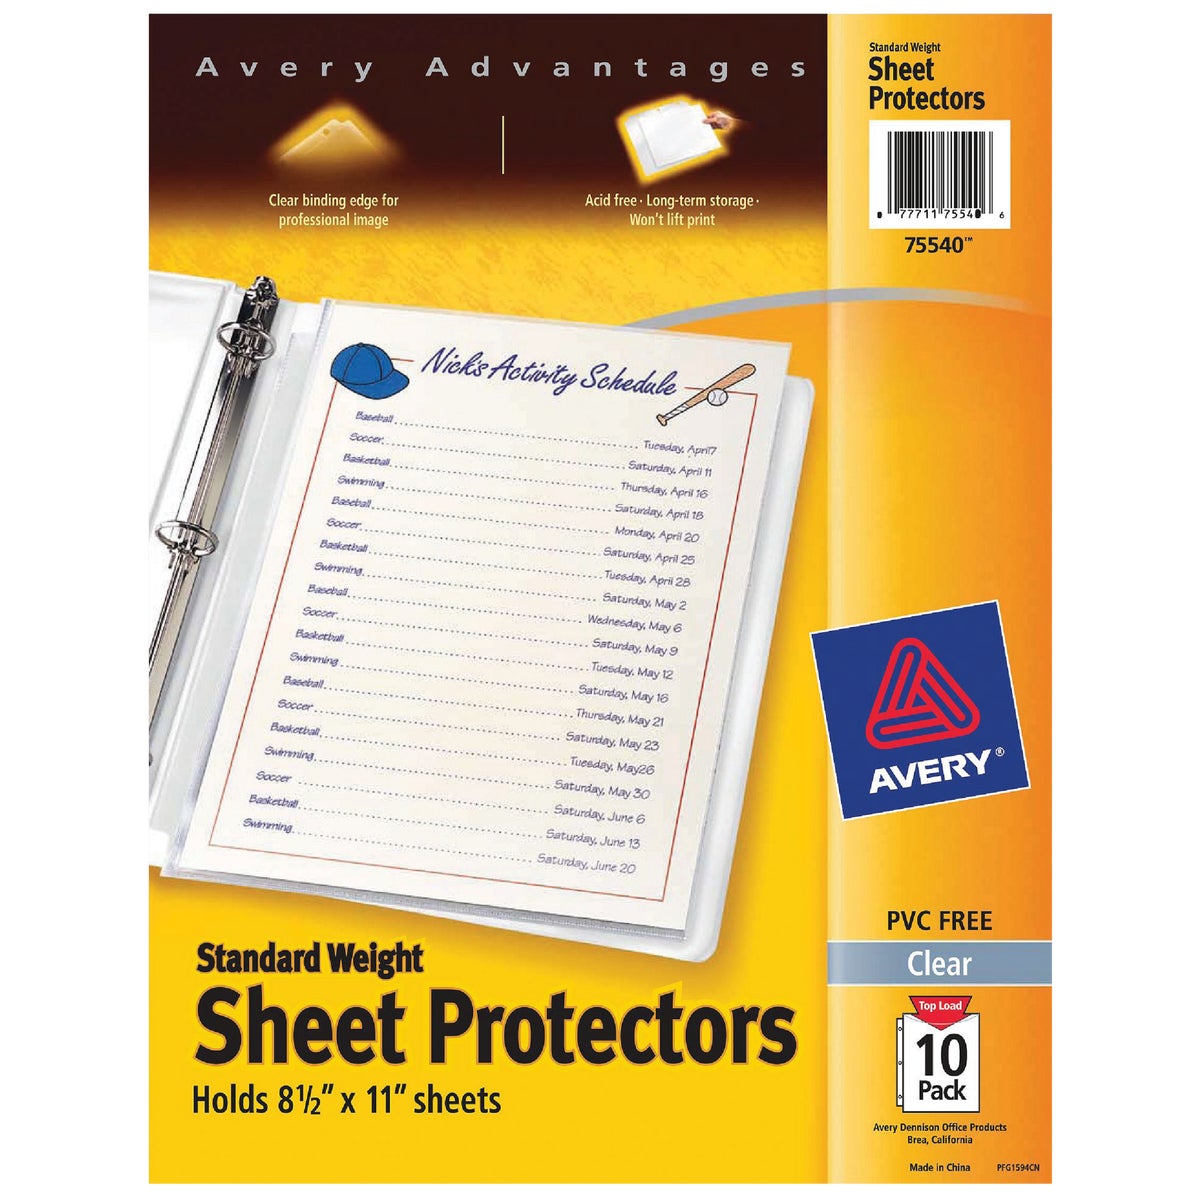 Item 973408, Standard weight reference sheet protectors. Diamond clear.